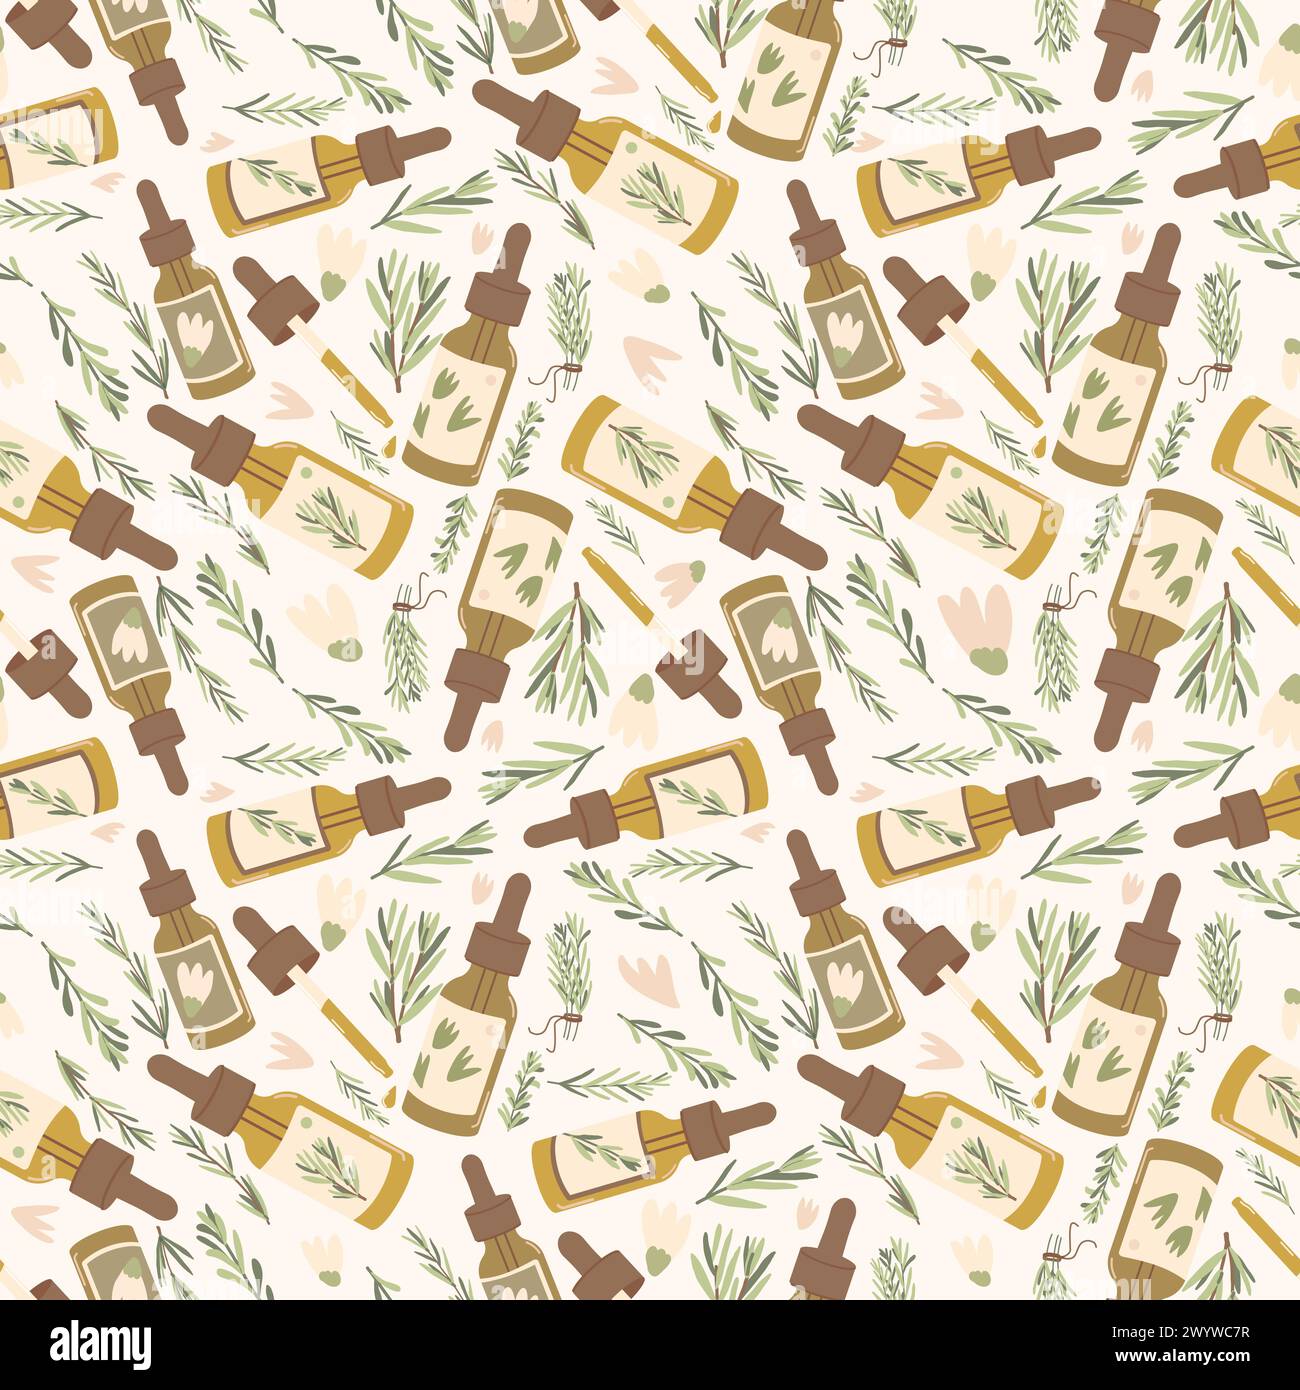 Essential oil seamless pattern. Amber glass dropper bottle of oil with fresh herb branch green leaves and flowers repeat background. Aromatherapy endl Stock Vector